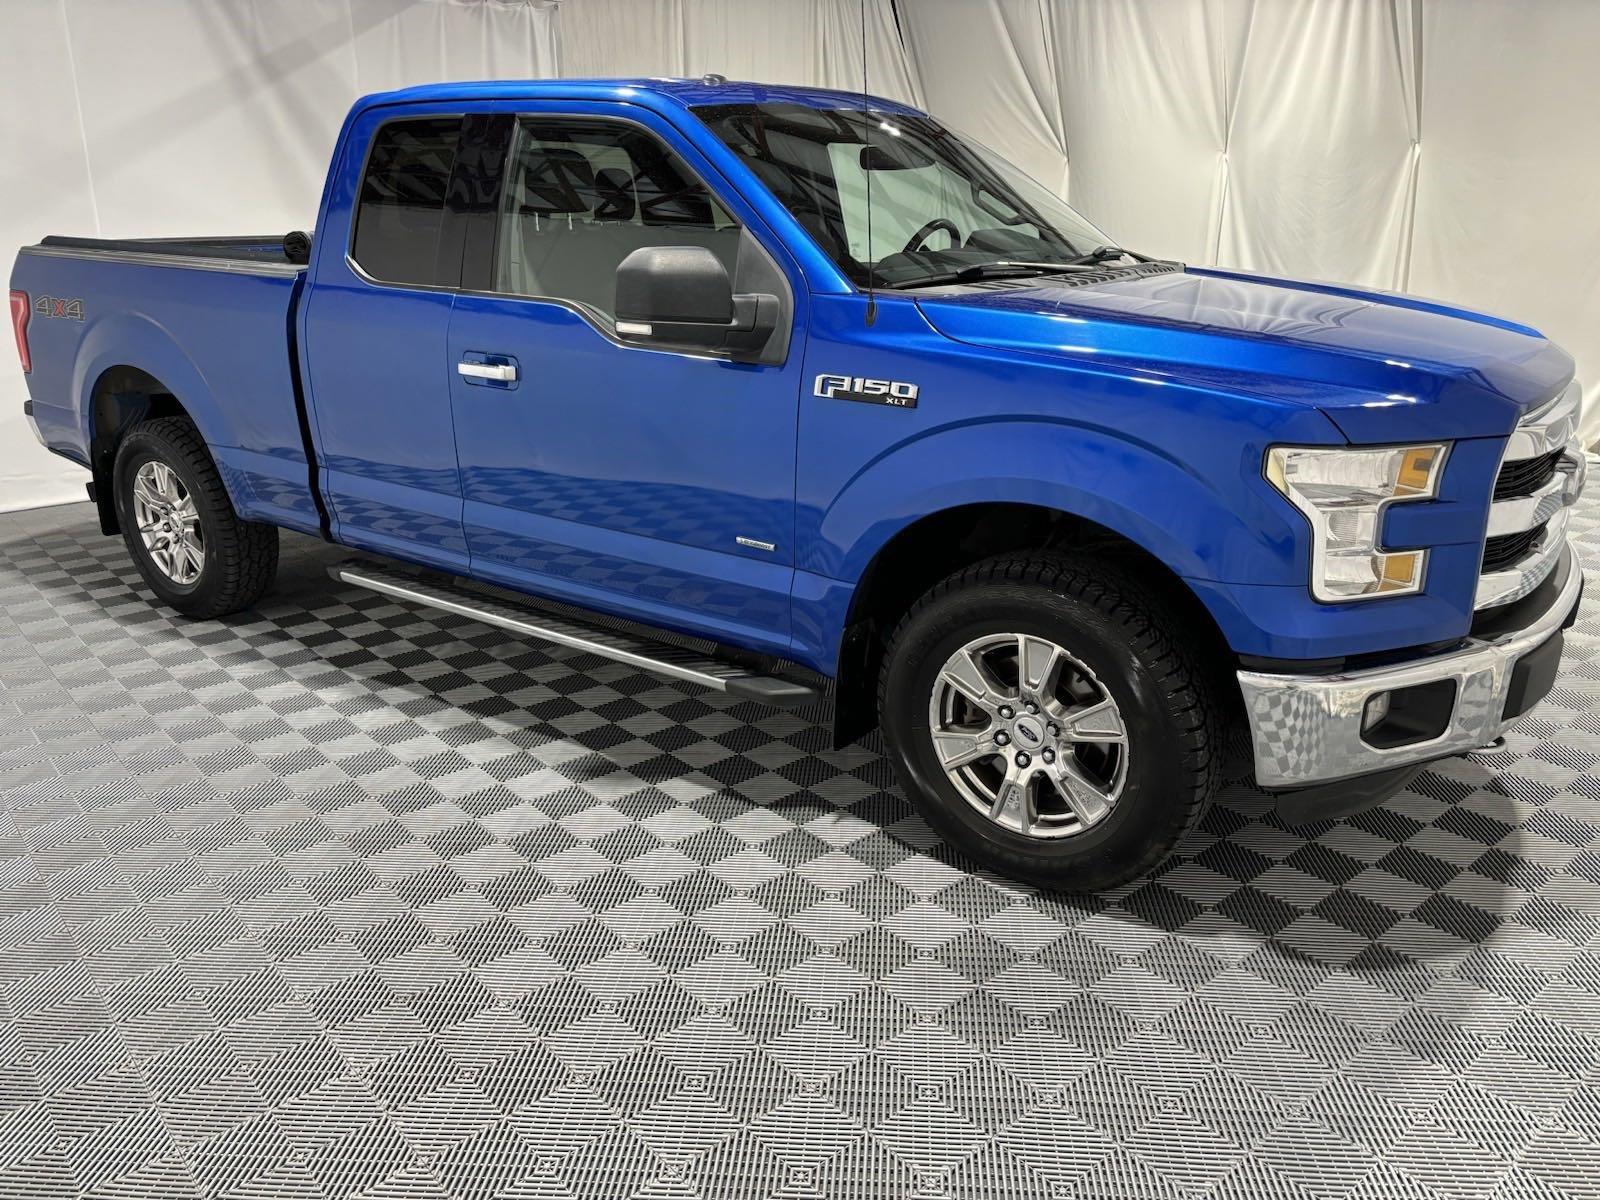 Used 2015 Ford F-150 XLT SuperCab Styleside for sale in St Joseph MO